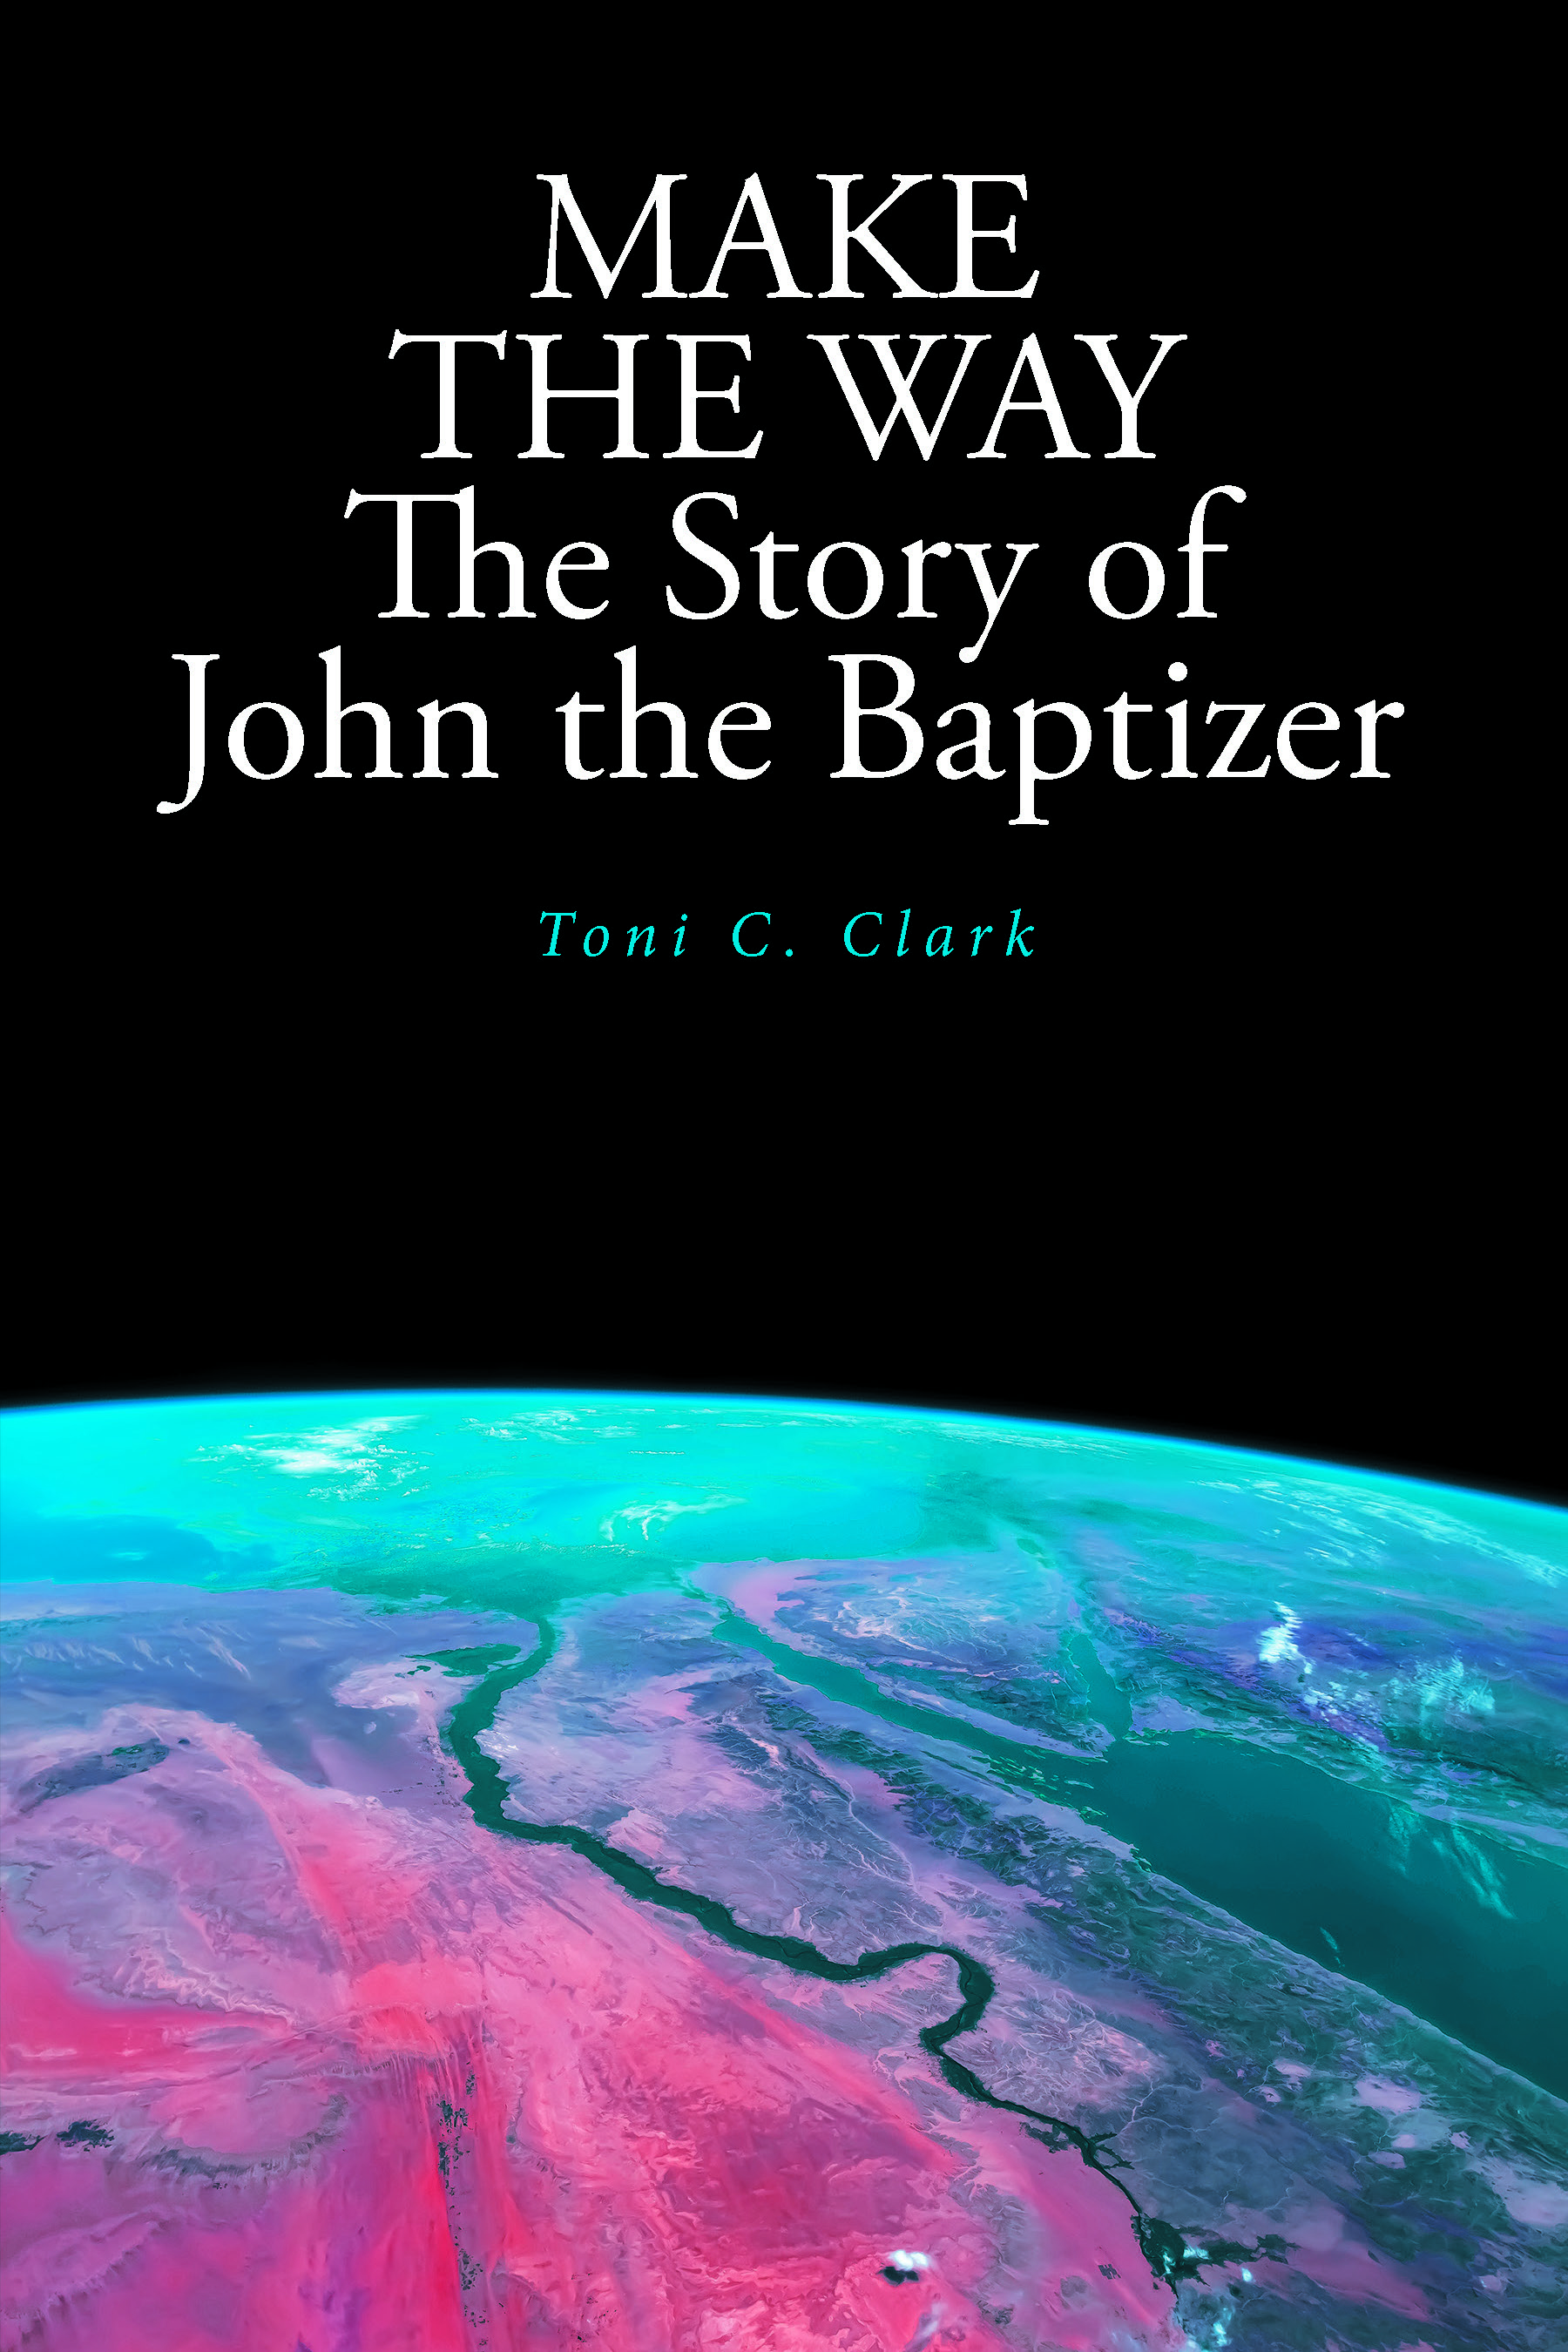 Toni C. Clark’s Newly Released “MAKE THE WAY The Story of John the Baptizer” is a Thoughtful Illumination of the Prophet’s Path